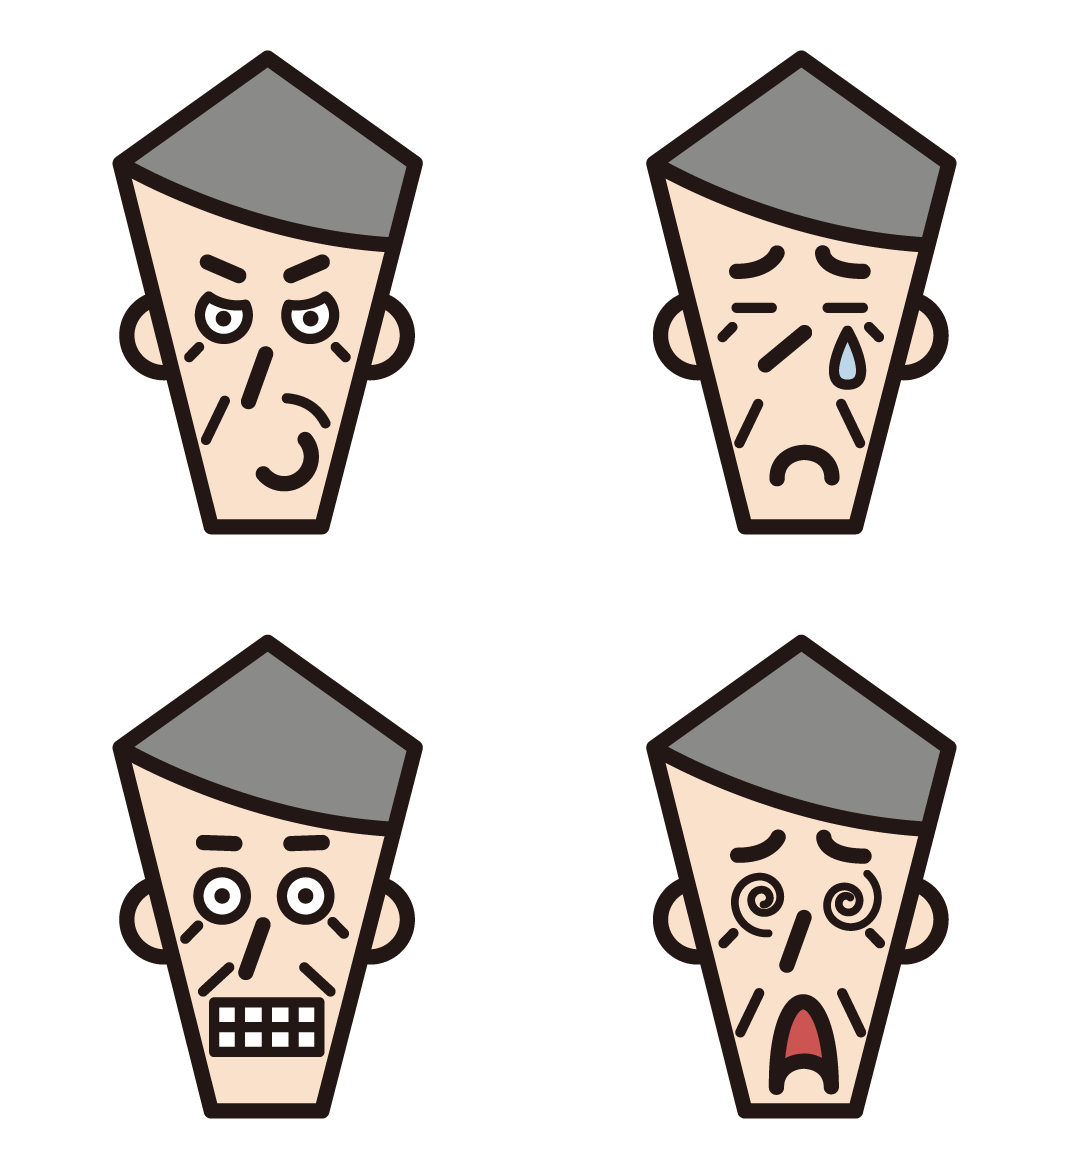 2 illustrations of the various expressions of the old man